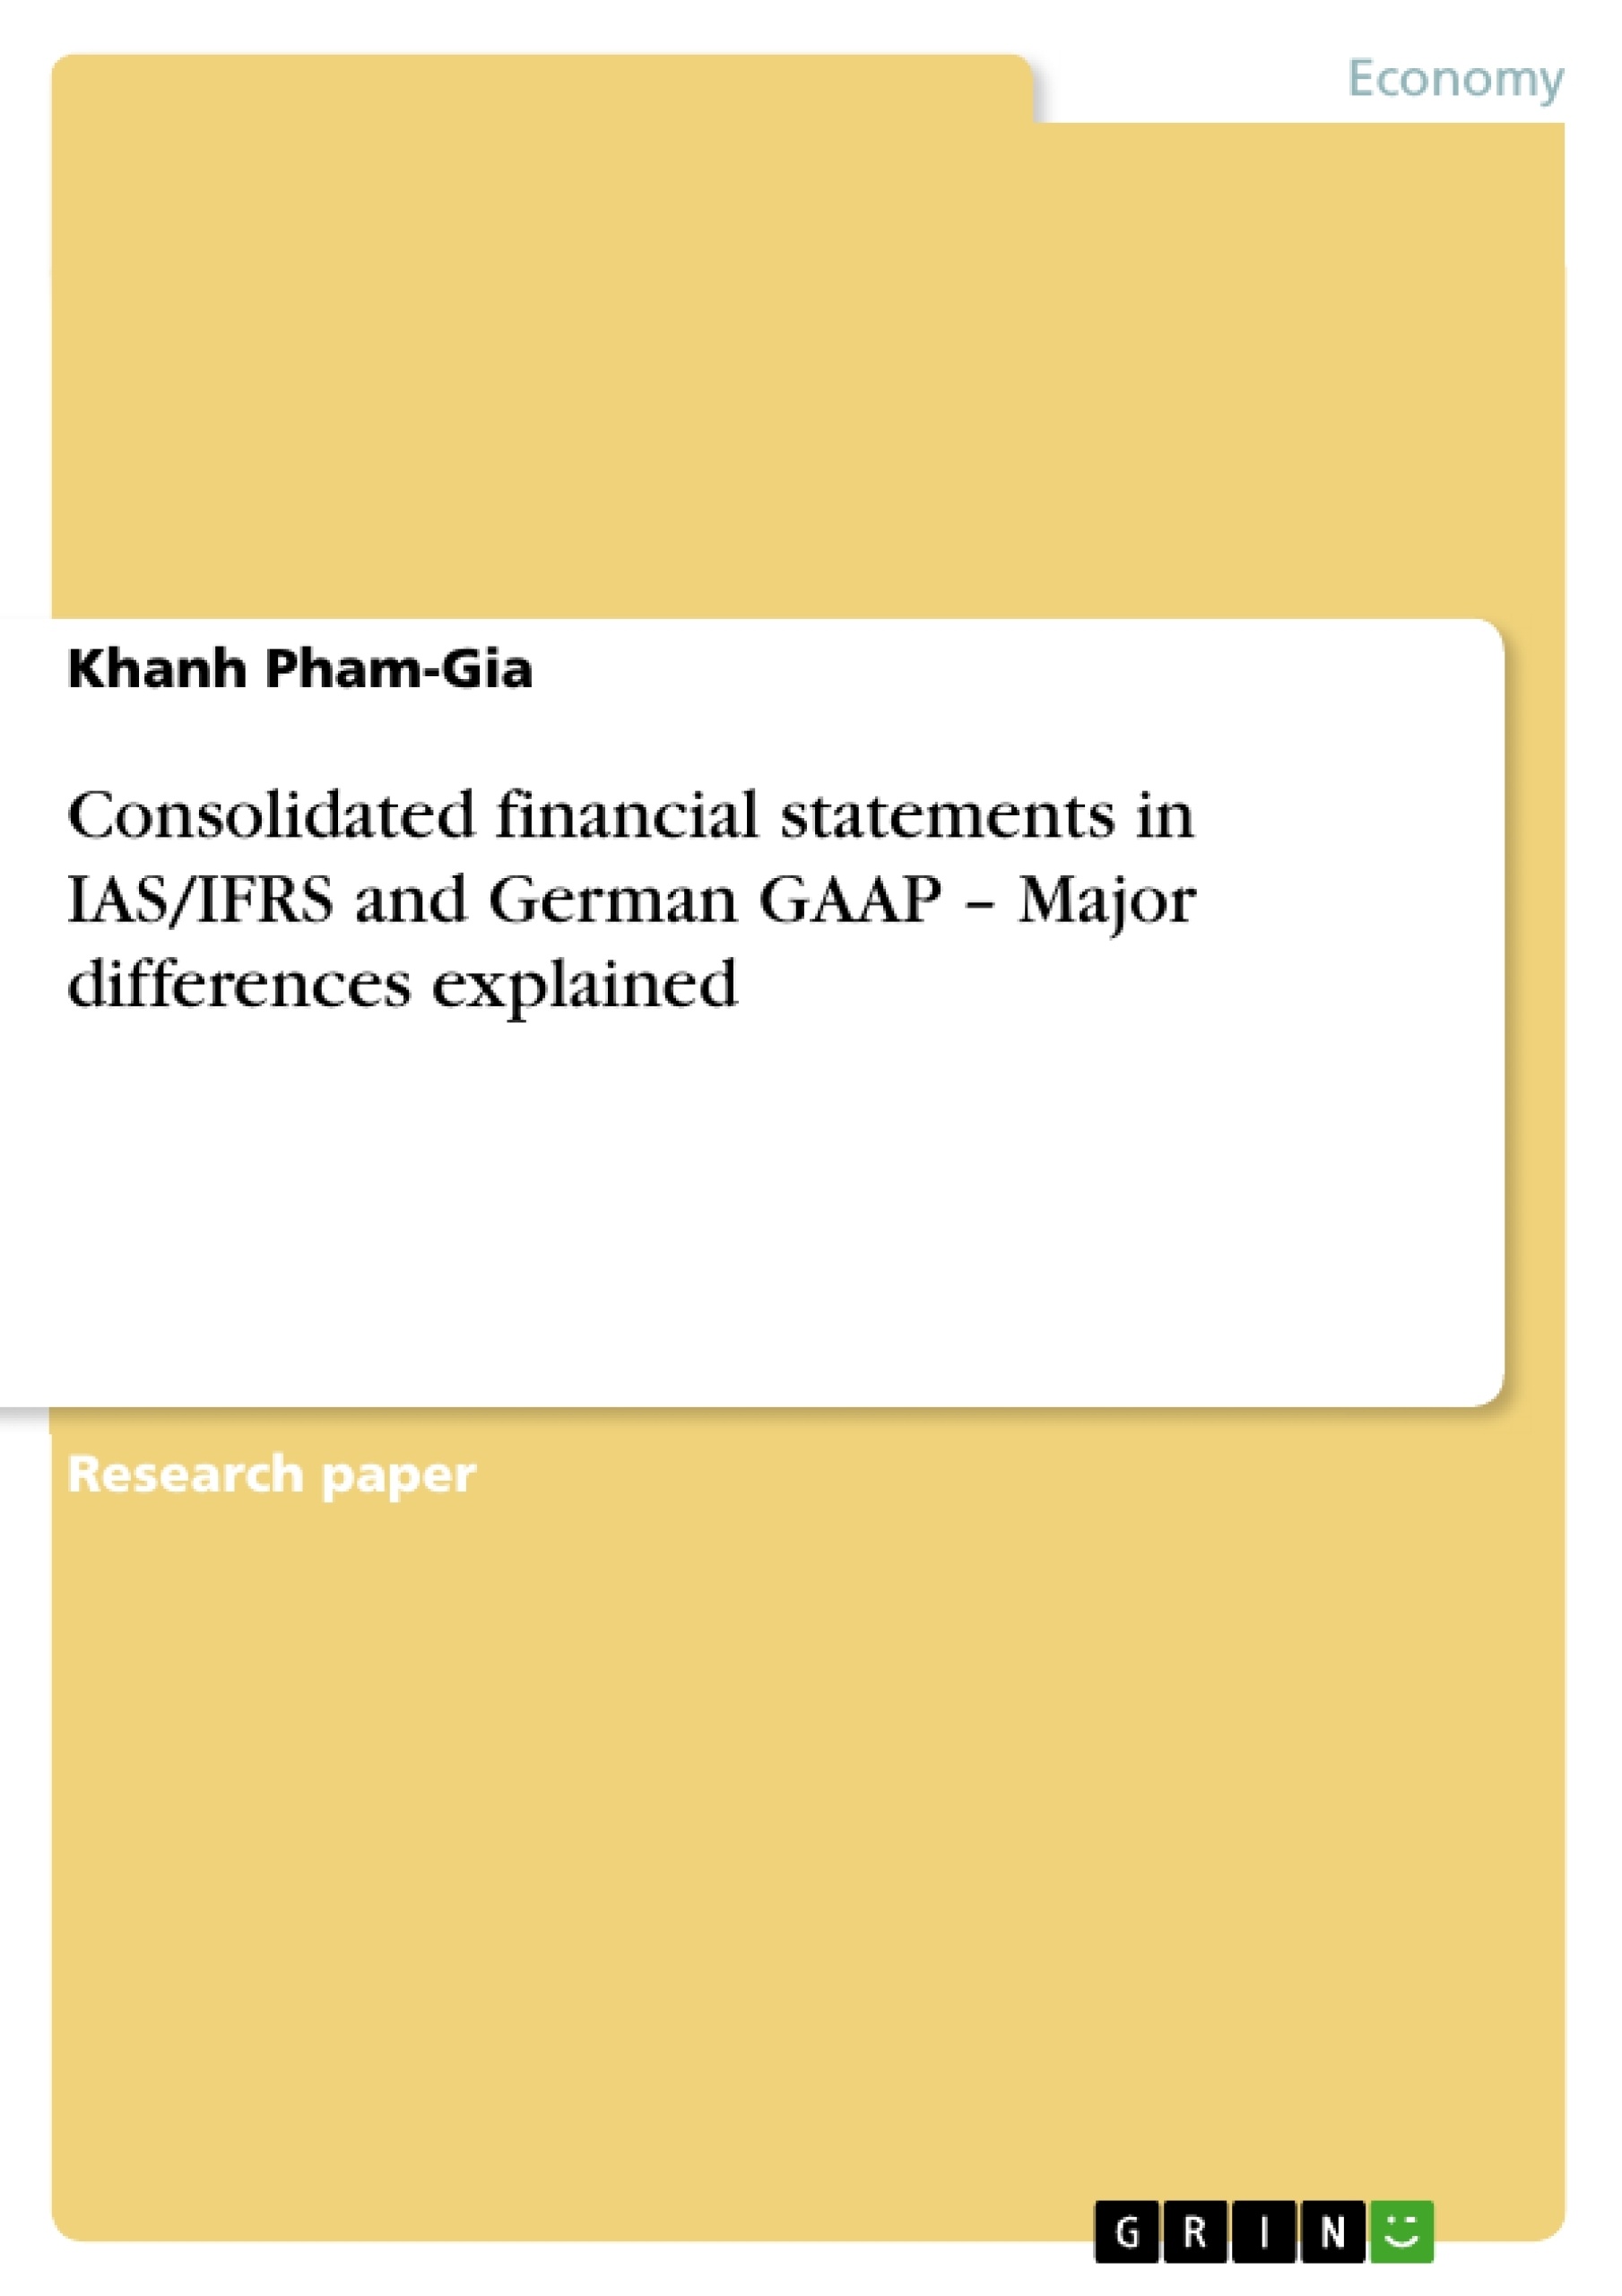 Title: Consolidated financial statements in IAS/IFRS and German GAAP – Major differences explained